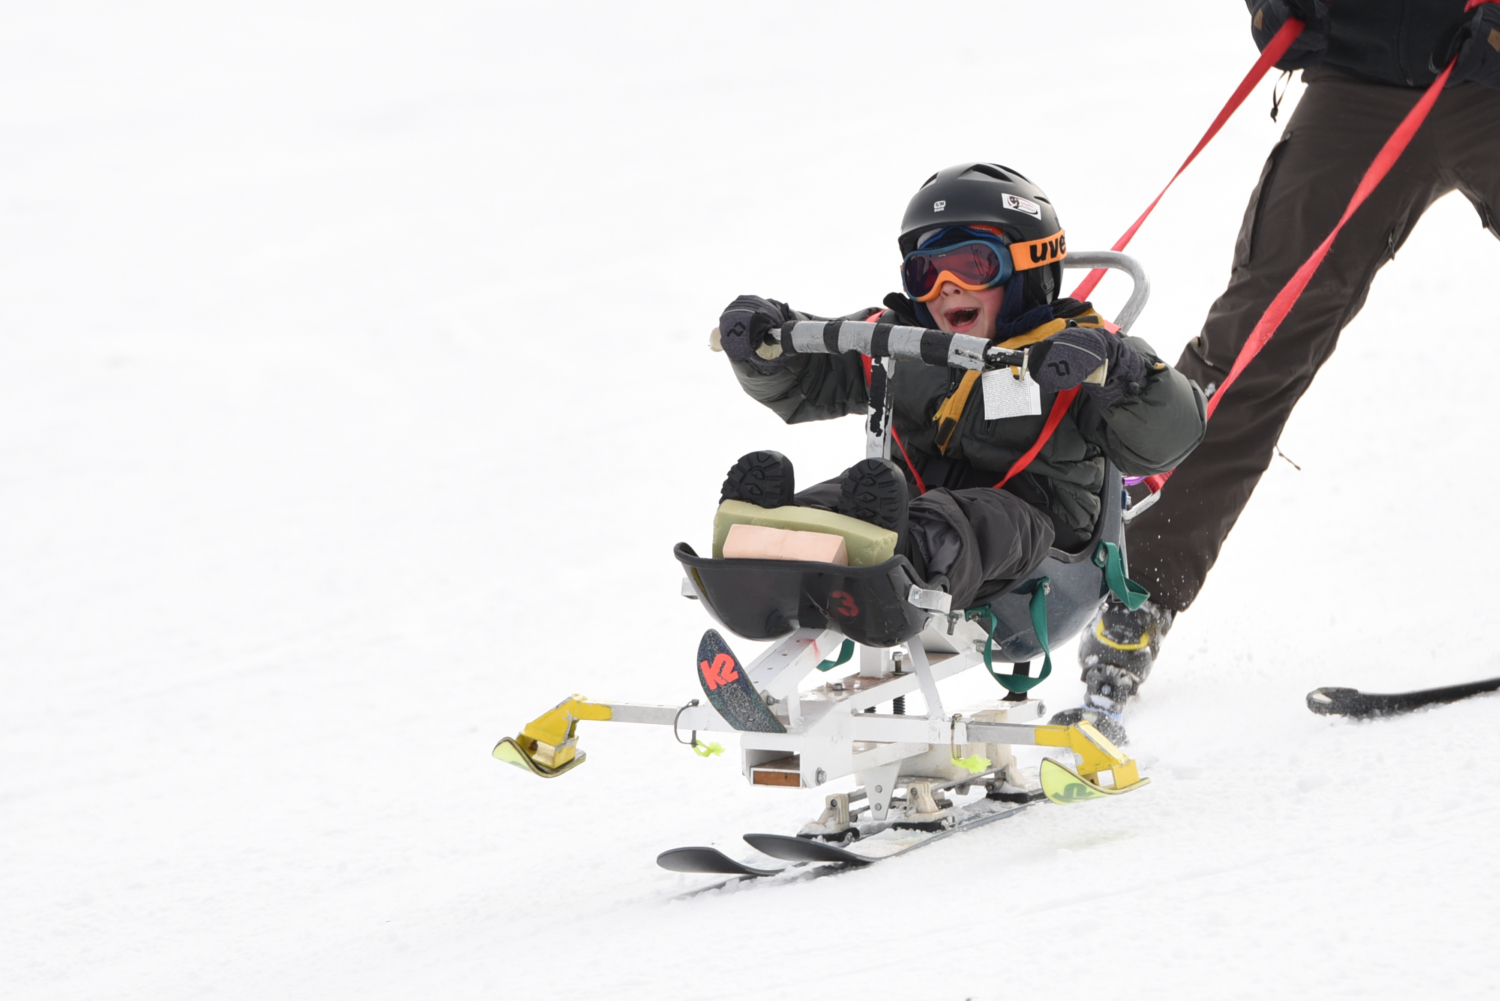 Young participant skiing down the slope in a biski. Participant is bundled up and smiling while holding on to handlebars.